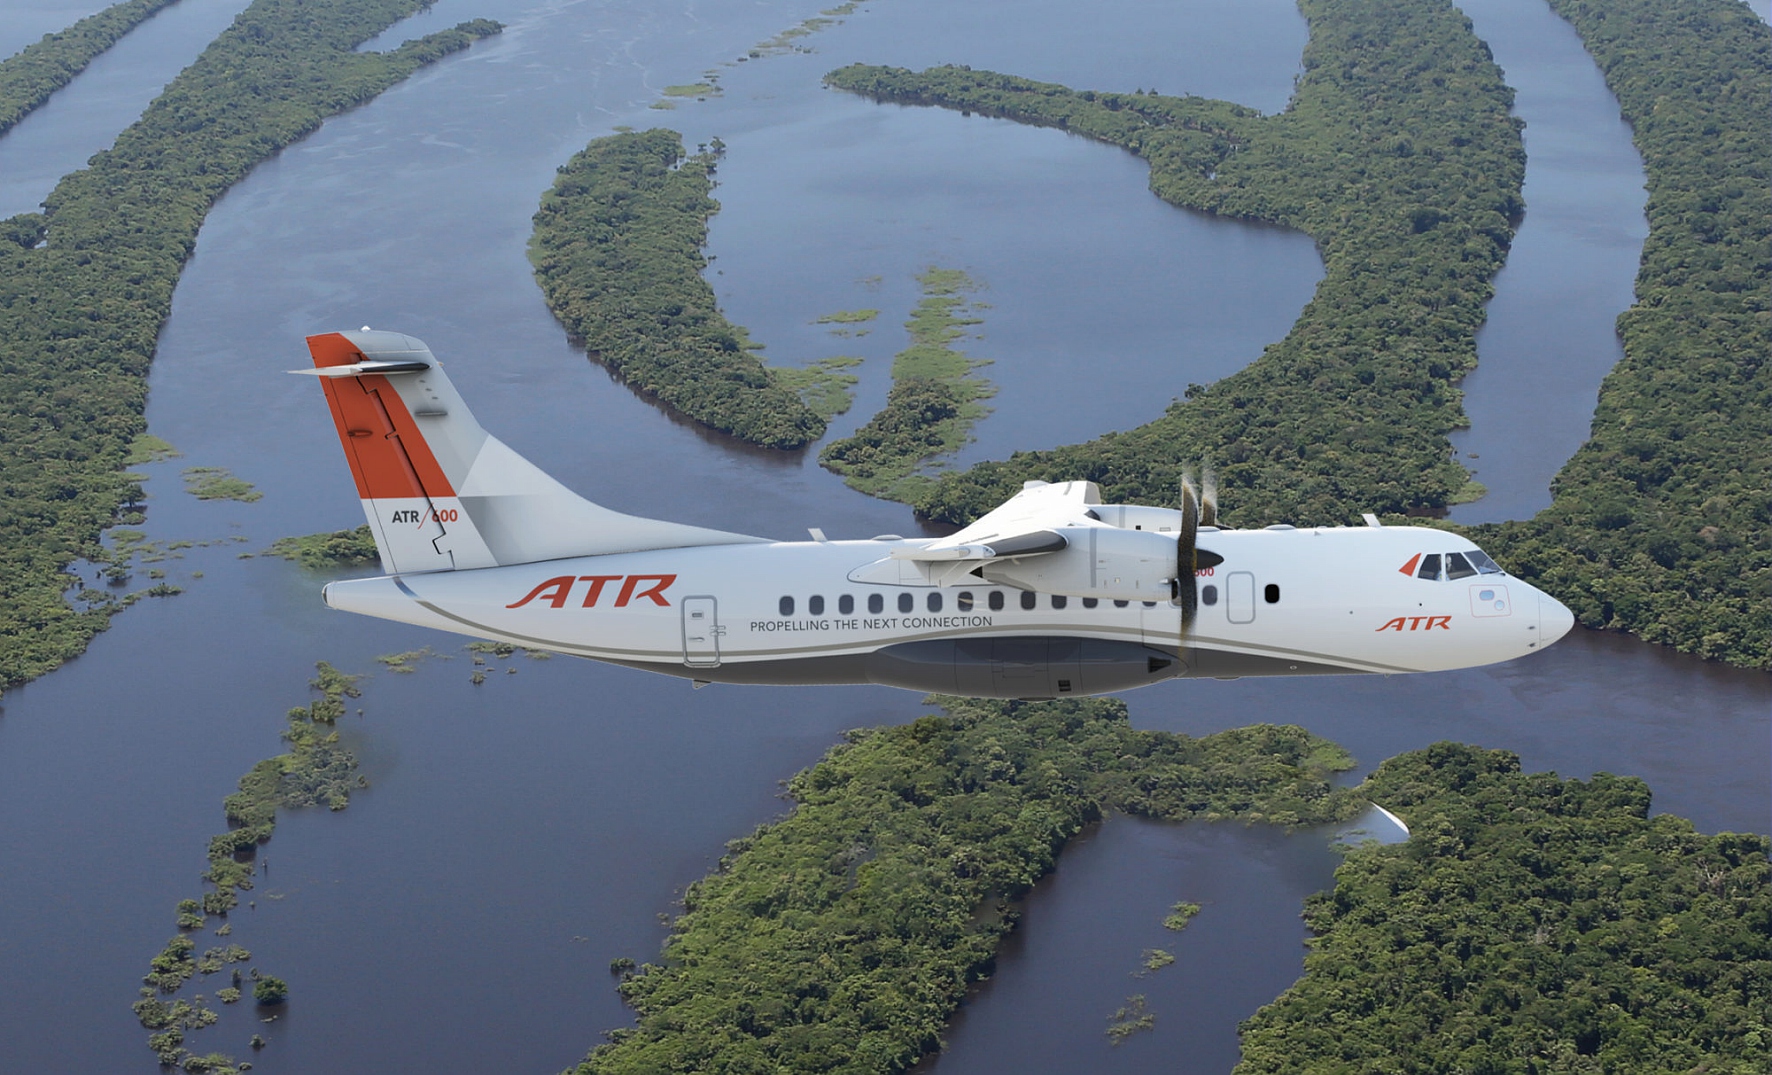  Speedy Airlines Enters Deal with ATR for Purchase of ATR 42-600 Aircraft Fleet